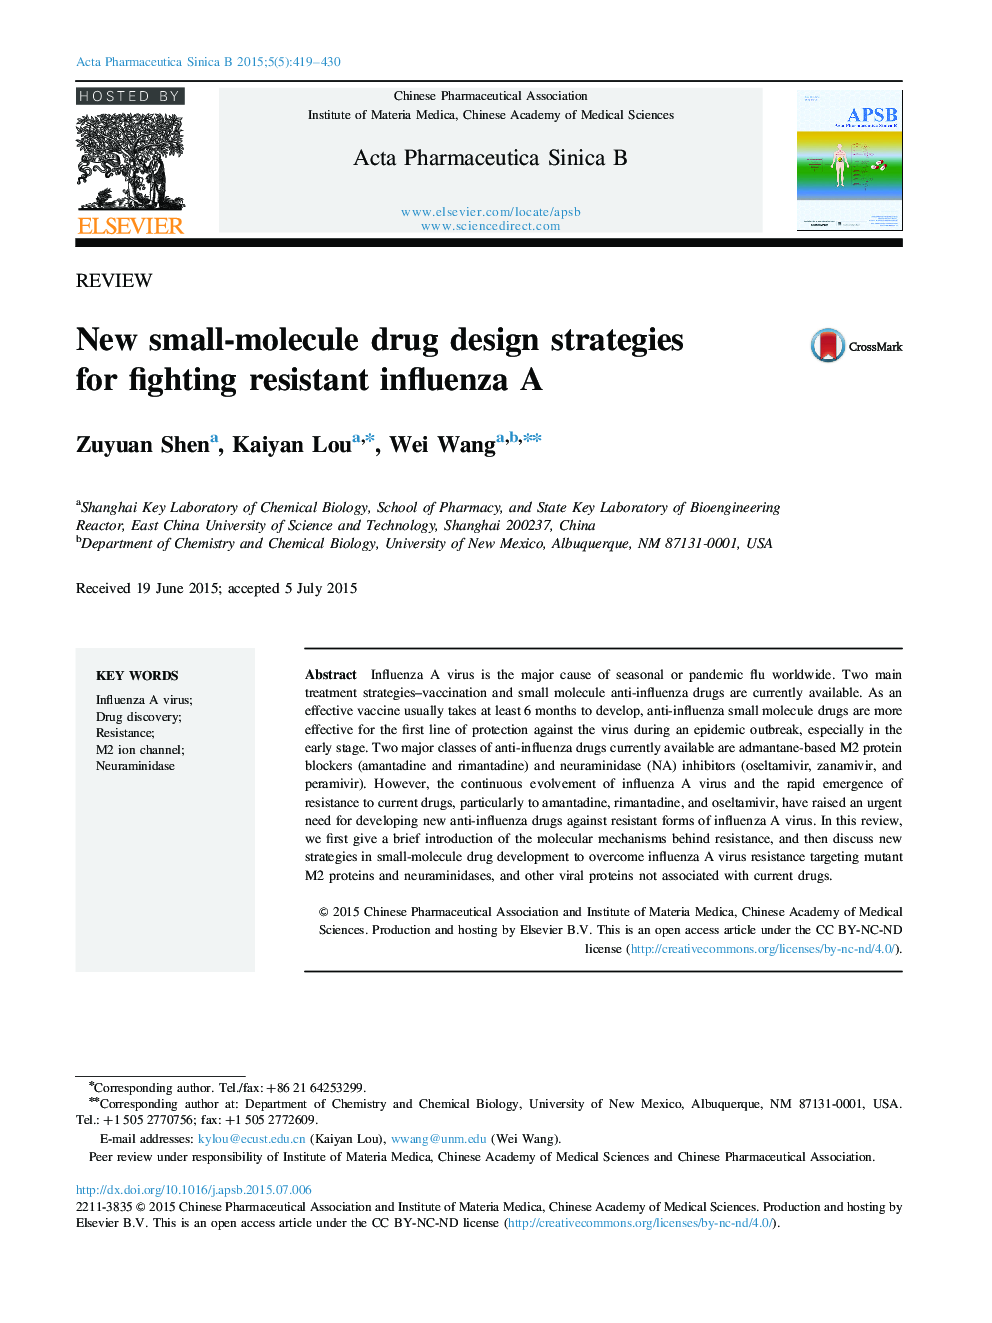 New small-molecule drug design strategies for fighting resistant influenza A 